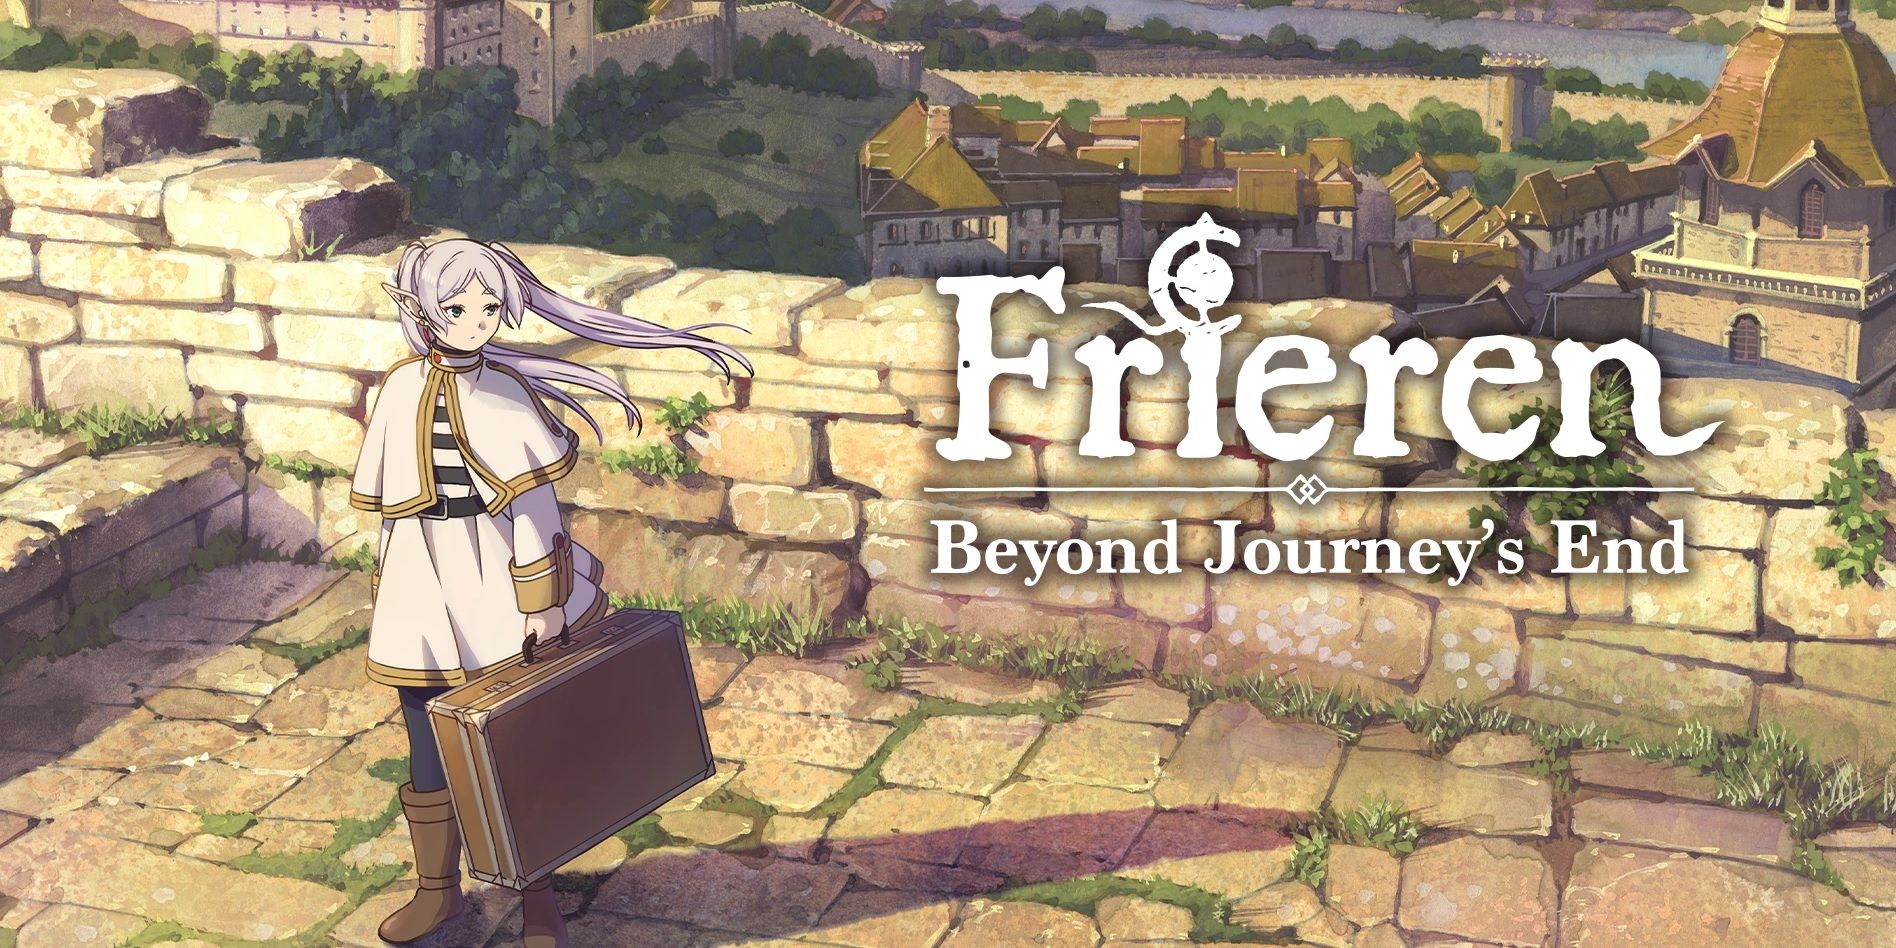 Frieren Beyond Journey's End featured image.